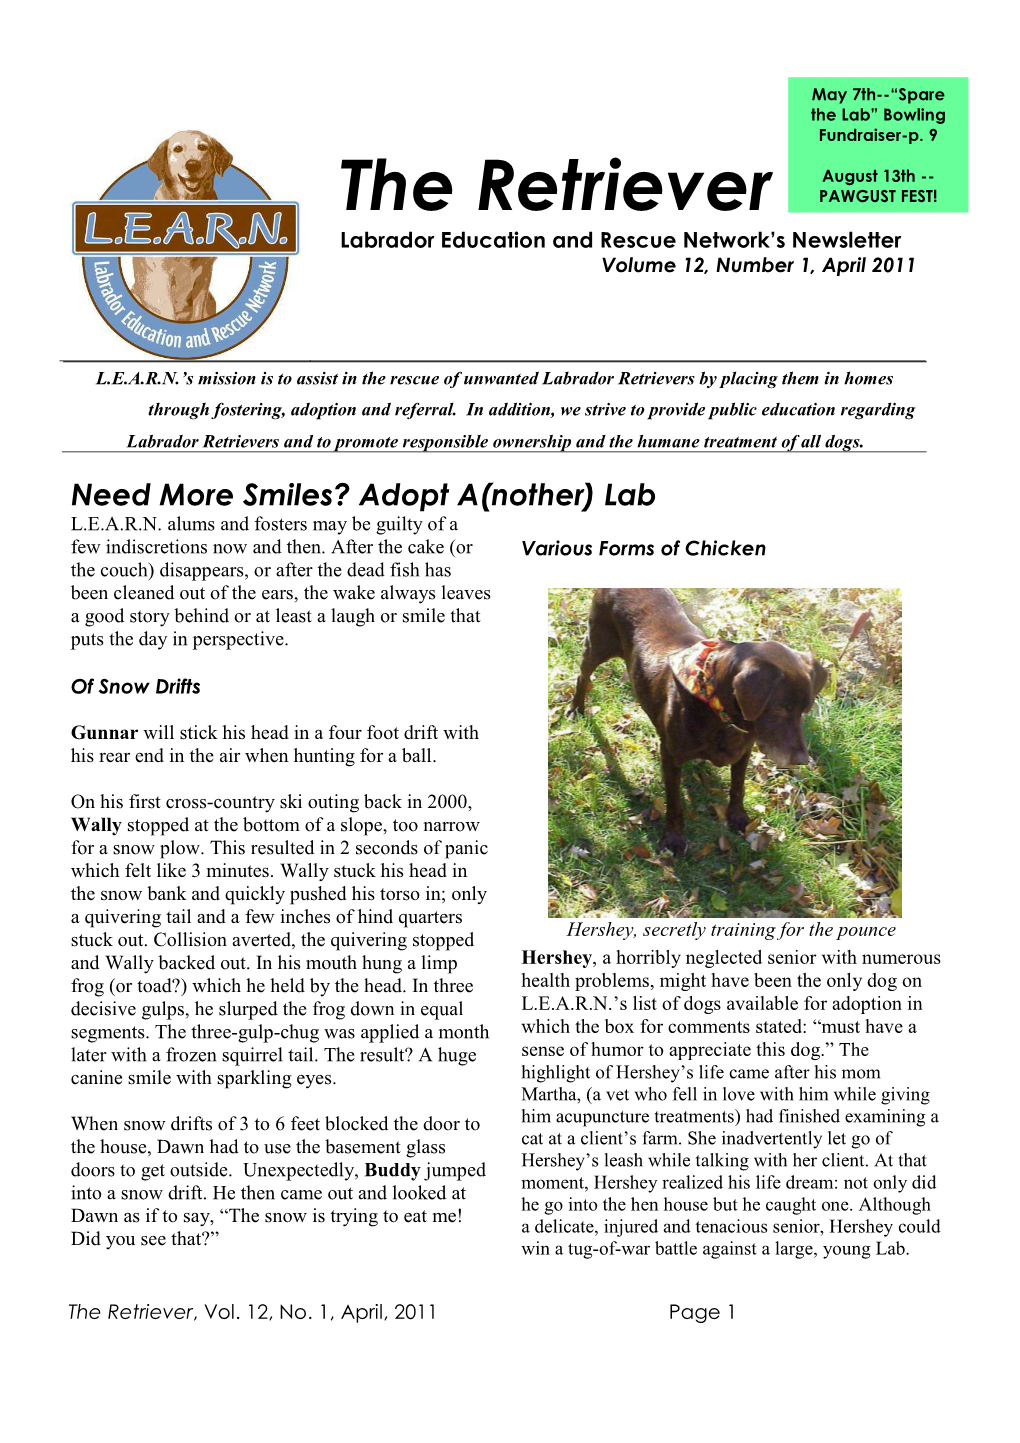 The Retriever PAWGUST FEST! Labrador Education and Rescue Network’S Newsletter Volume 12, Number 1, April 2011